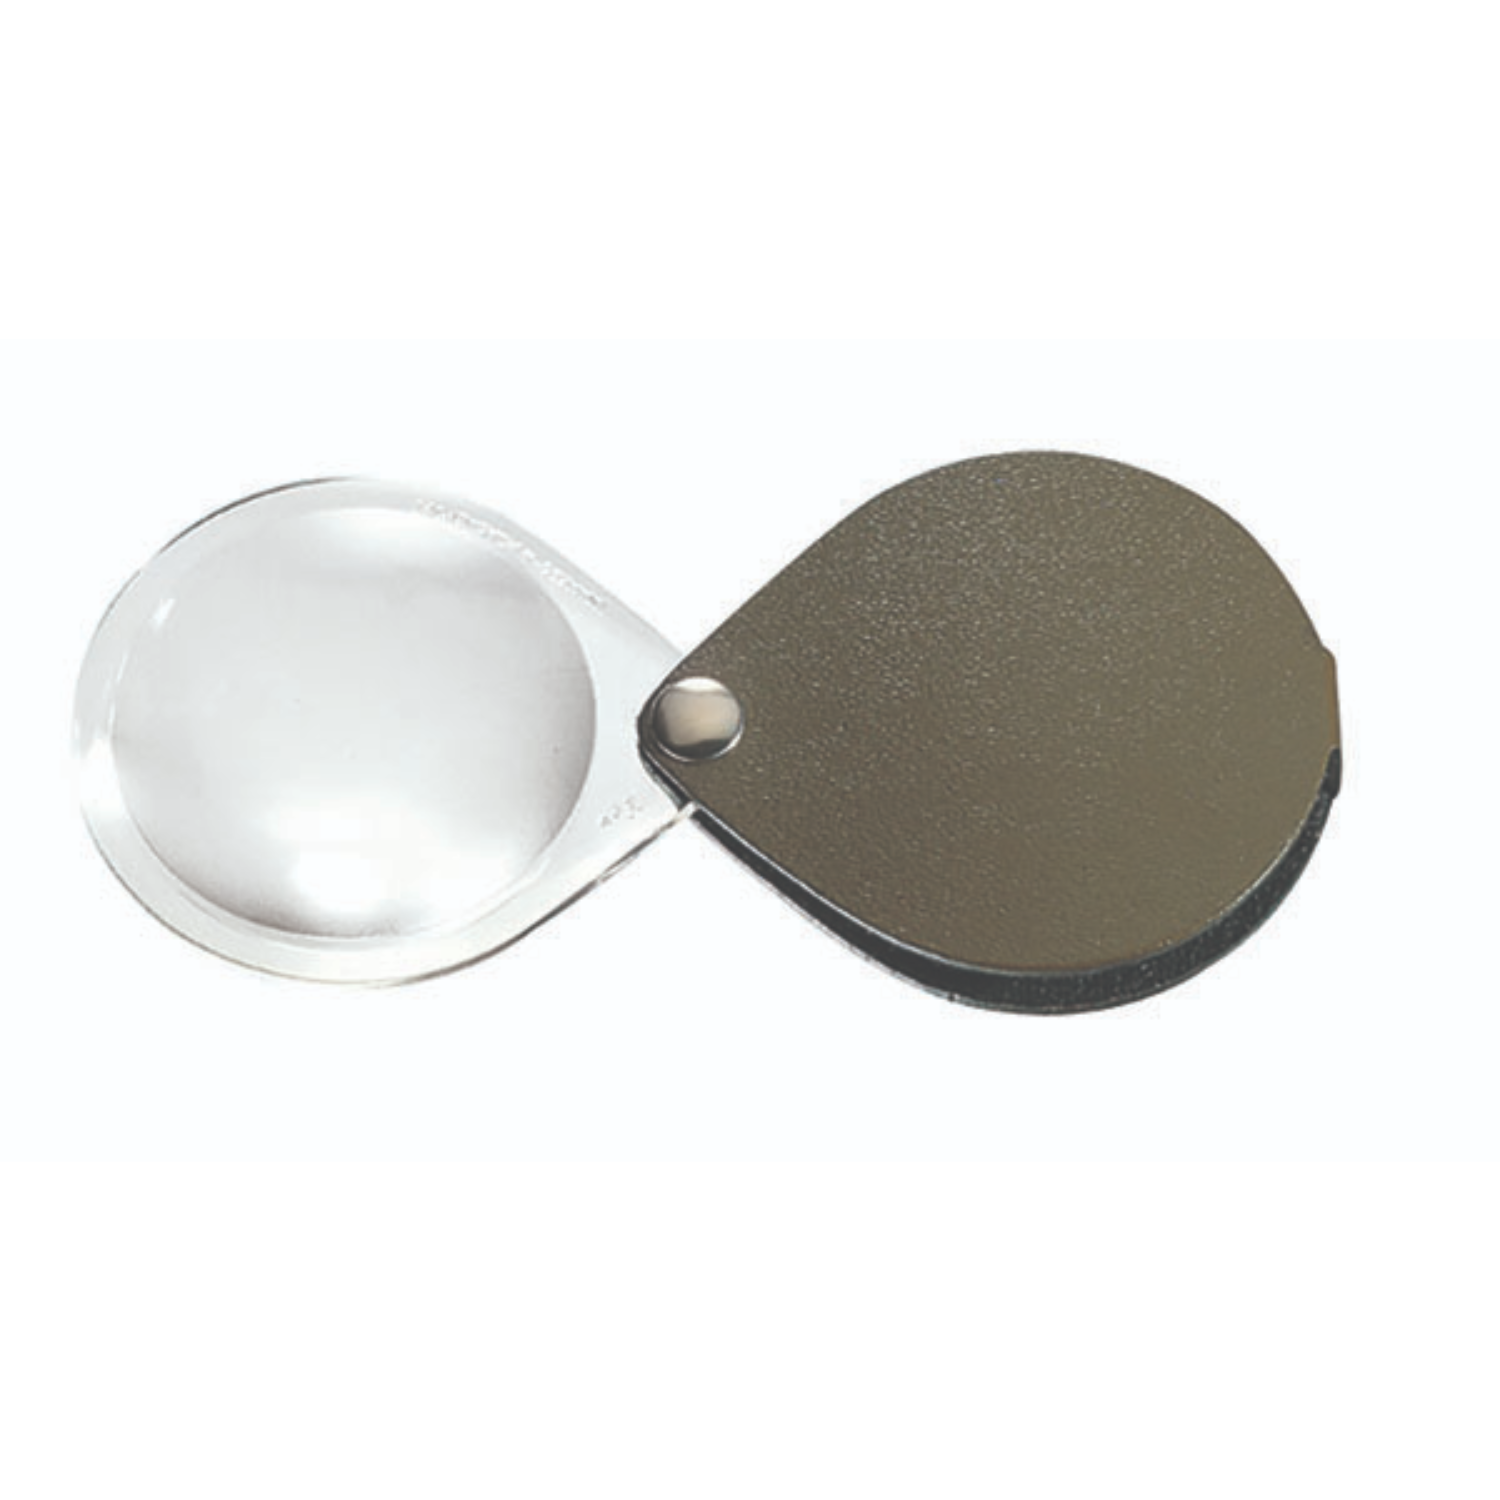 Image of a pine green classic round folding pocket magnifier from Eschenbach Optik